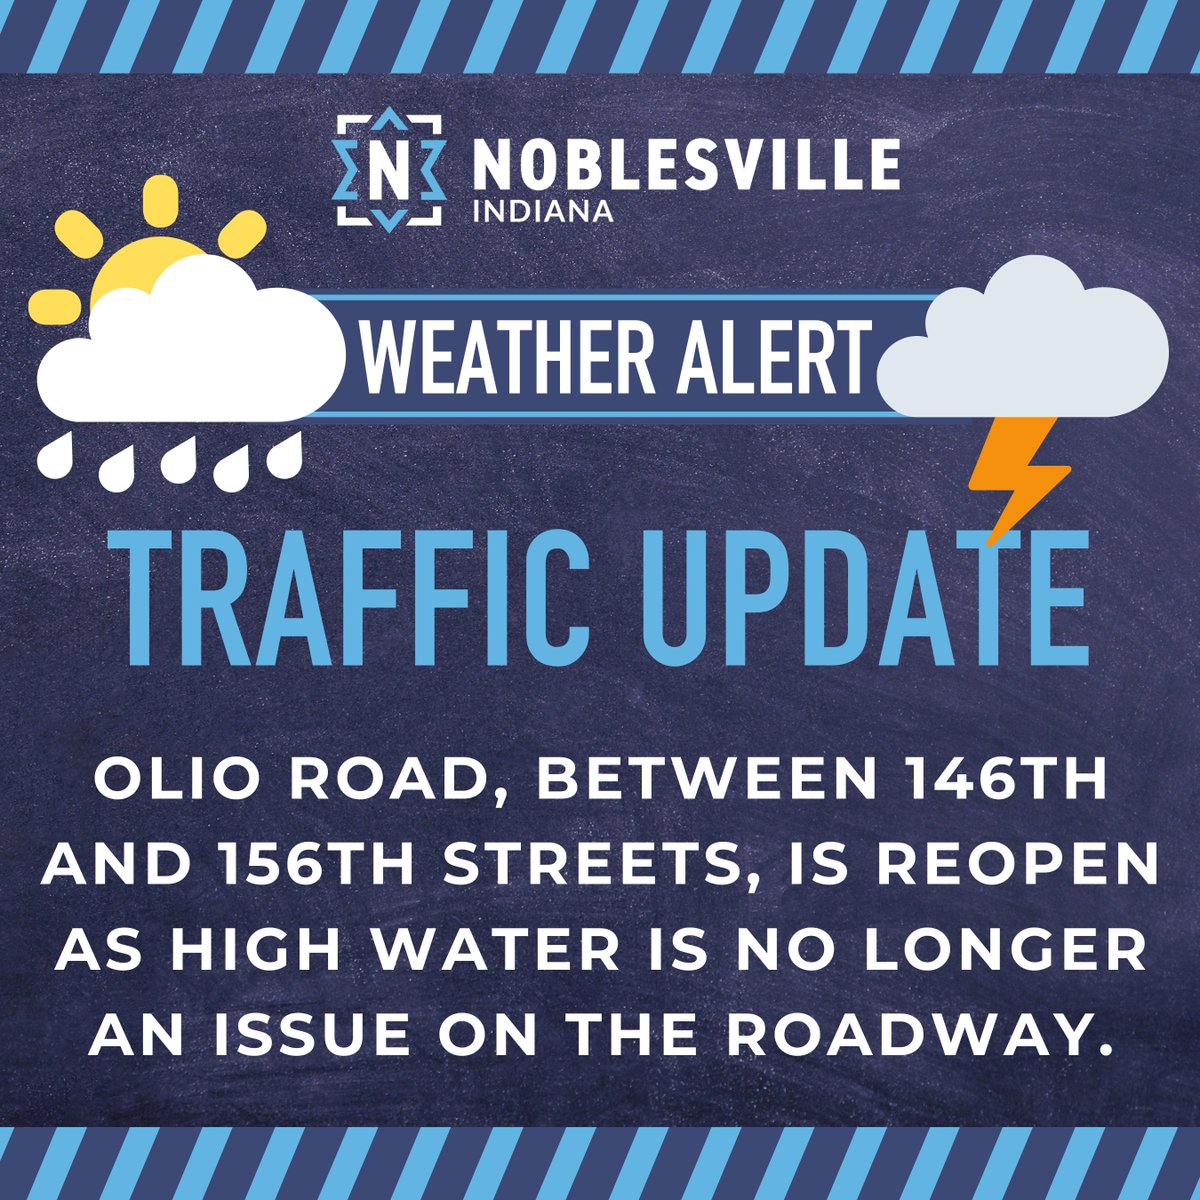 UPDATE - Olio Road between 146th and 156th Street is no longer closed. #TrafficAlert